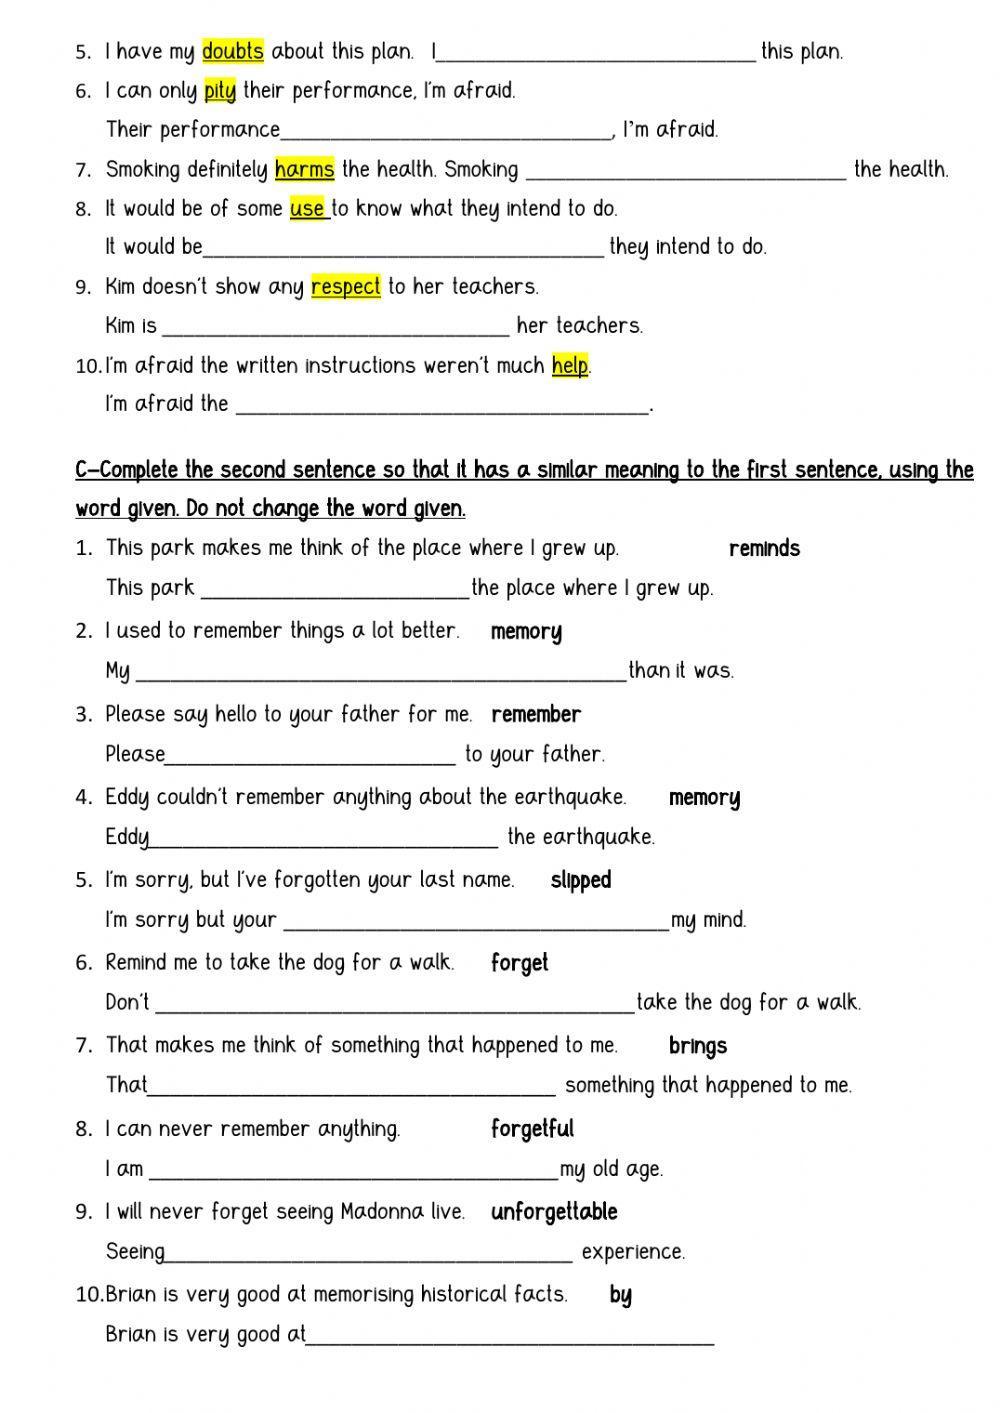 Expressions and phrases 2 CAE